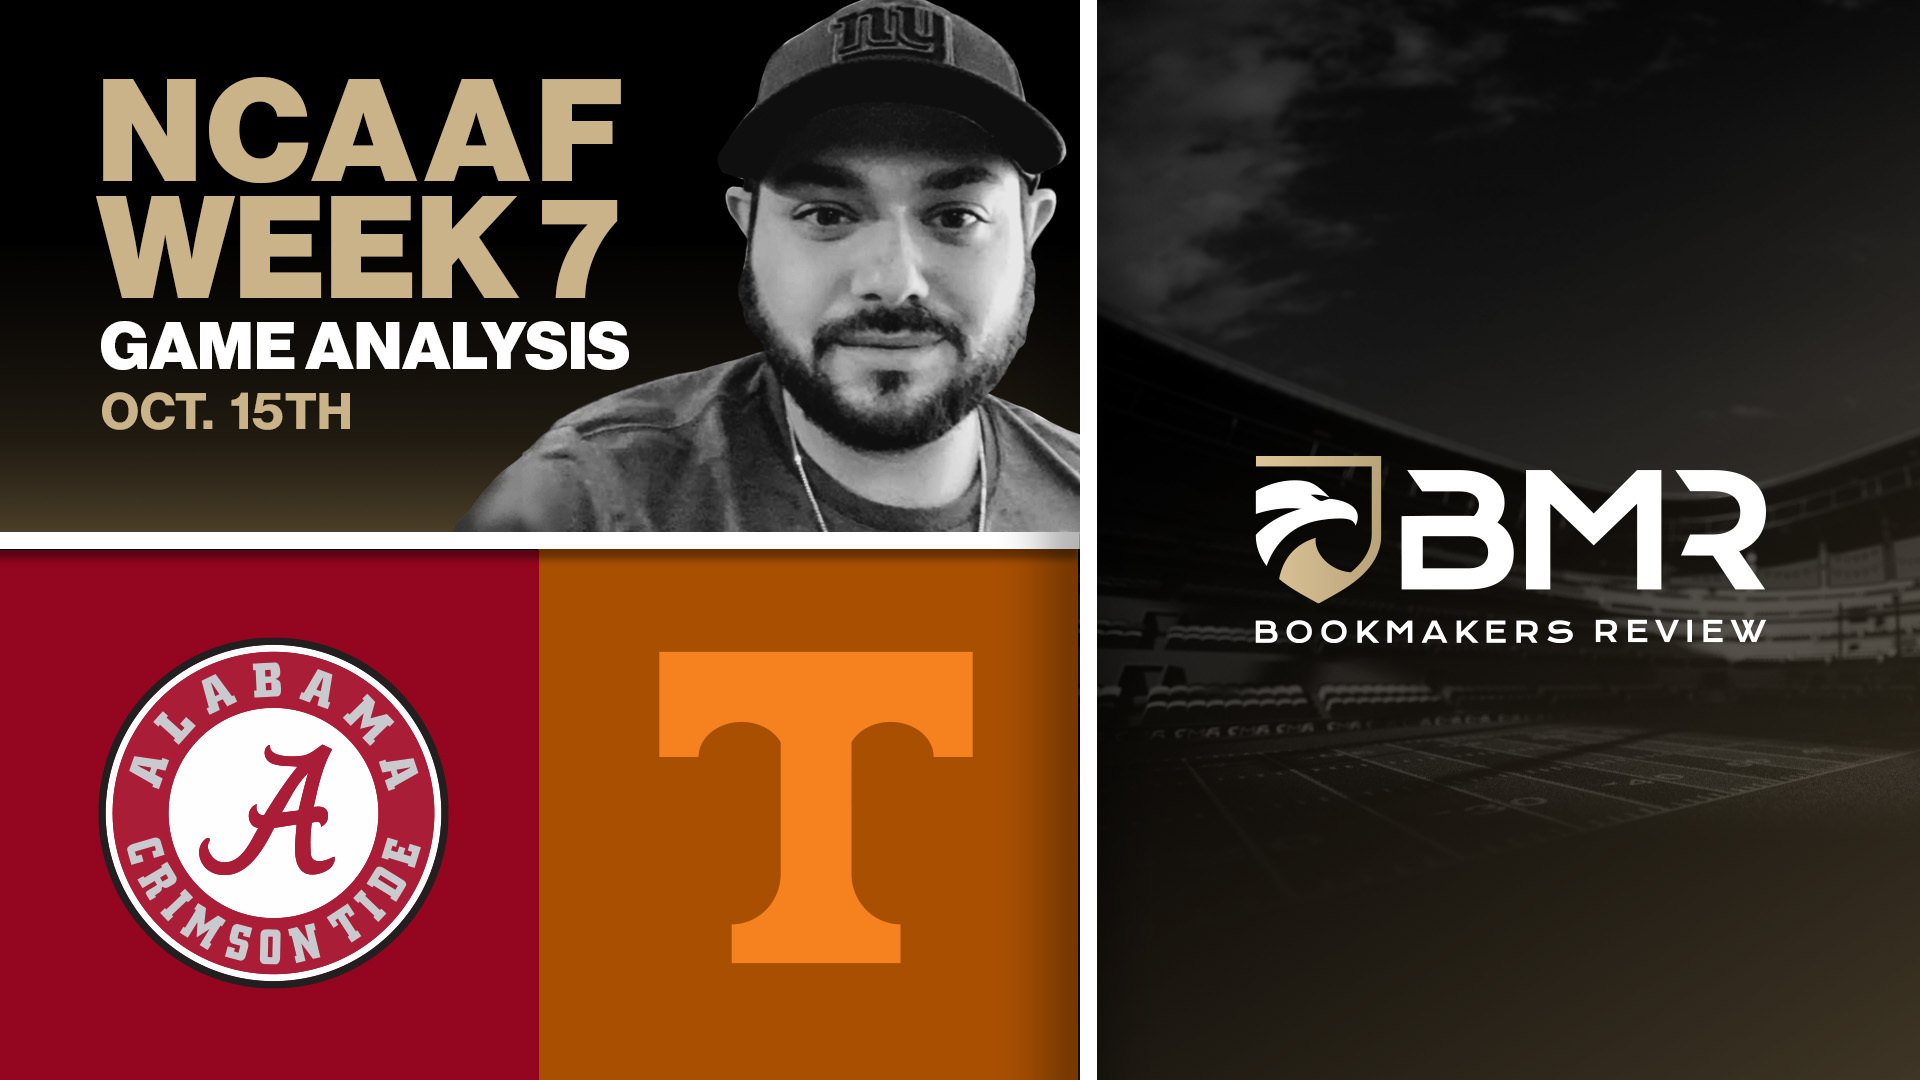 Alabama vs. Tennessee &#8211; NCAAF Week 7 Pick by Alpha Dog (Oct. 15th)